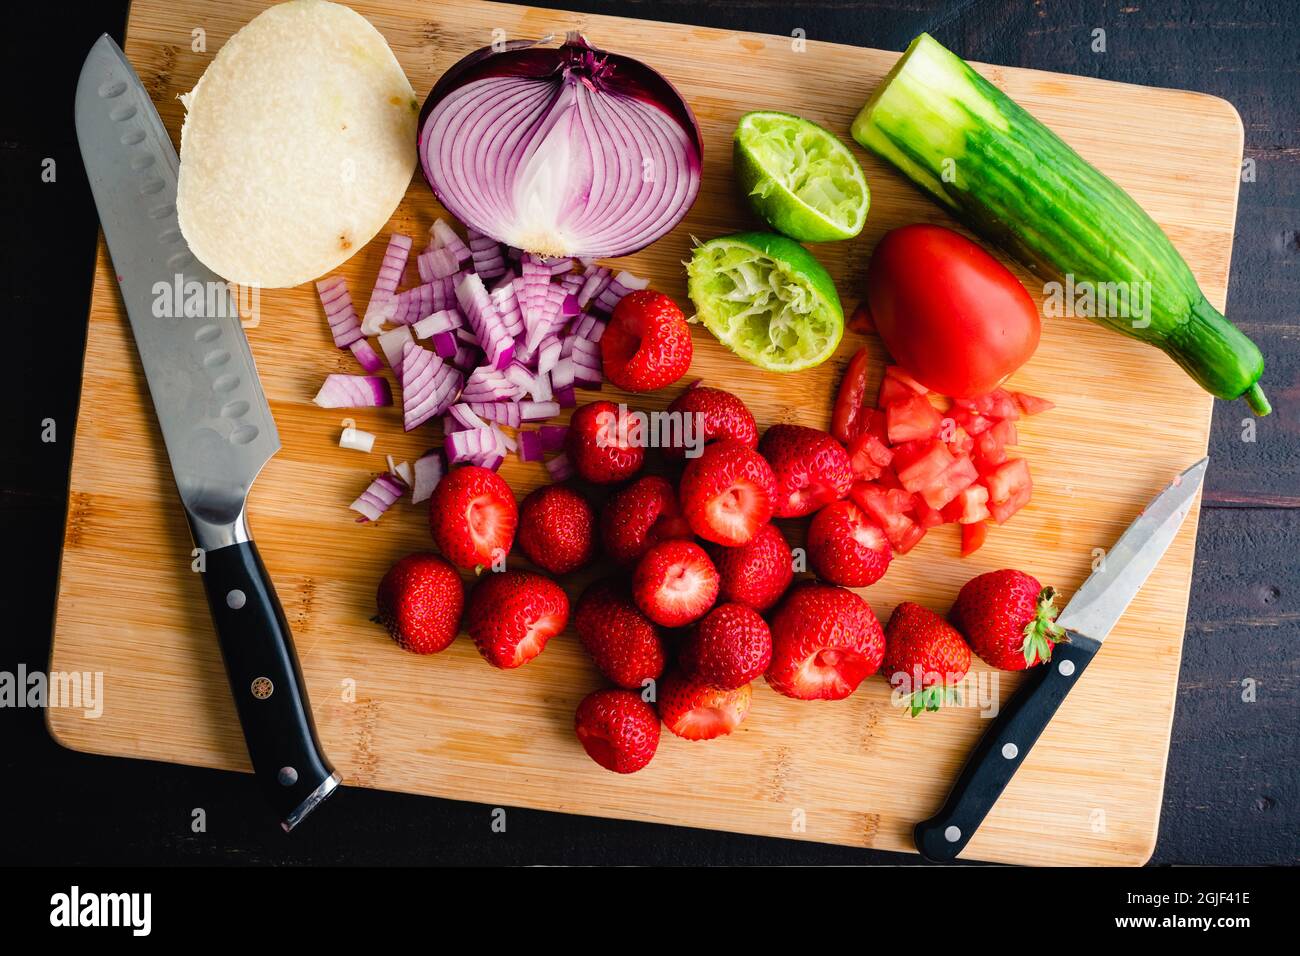 Bamboo Cutting Board For Cutting Food Such As Fruits, Vegetables